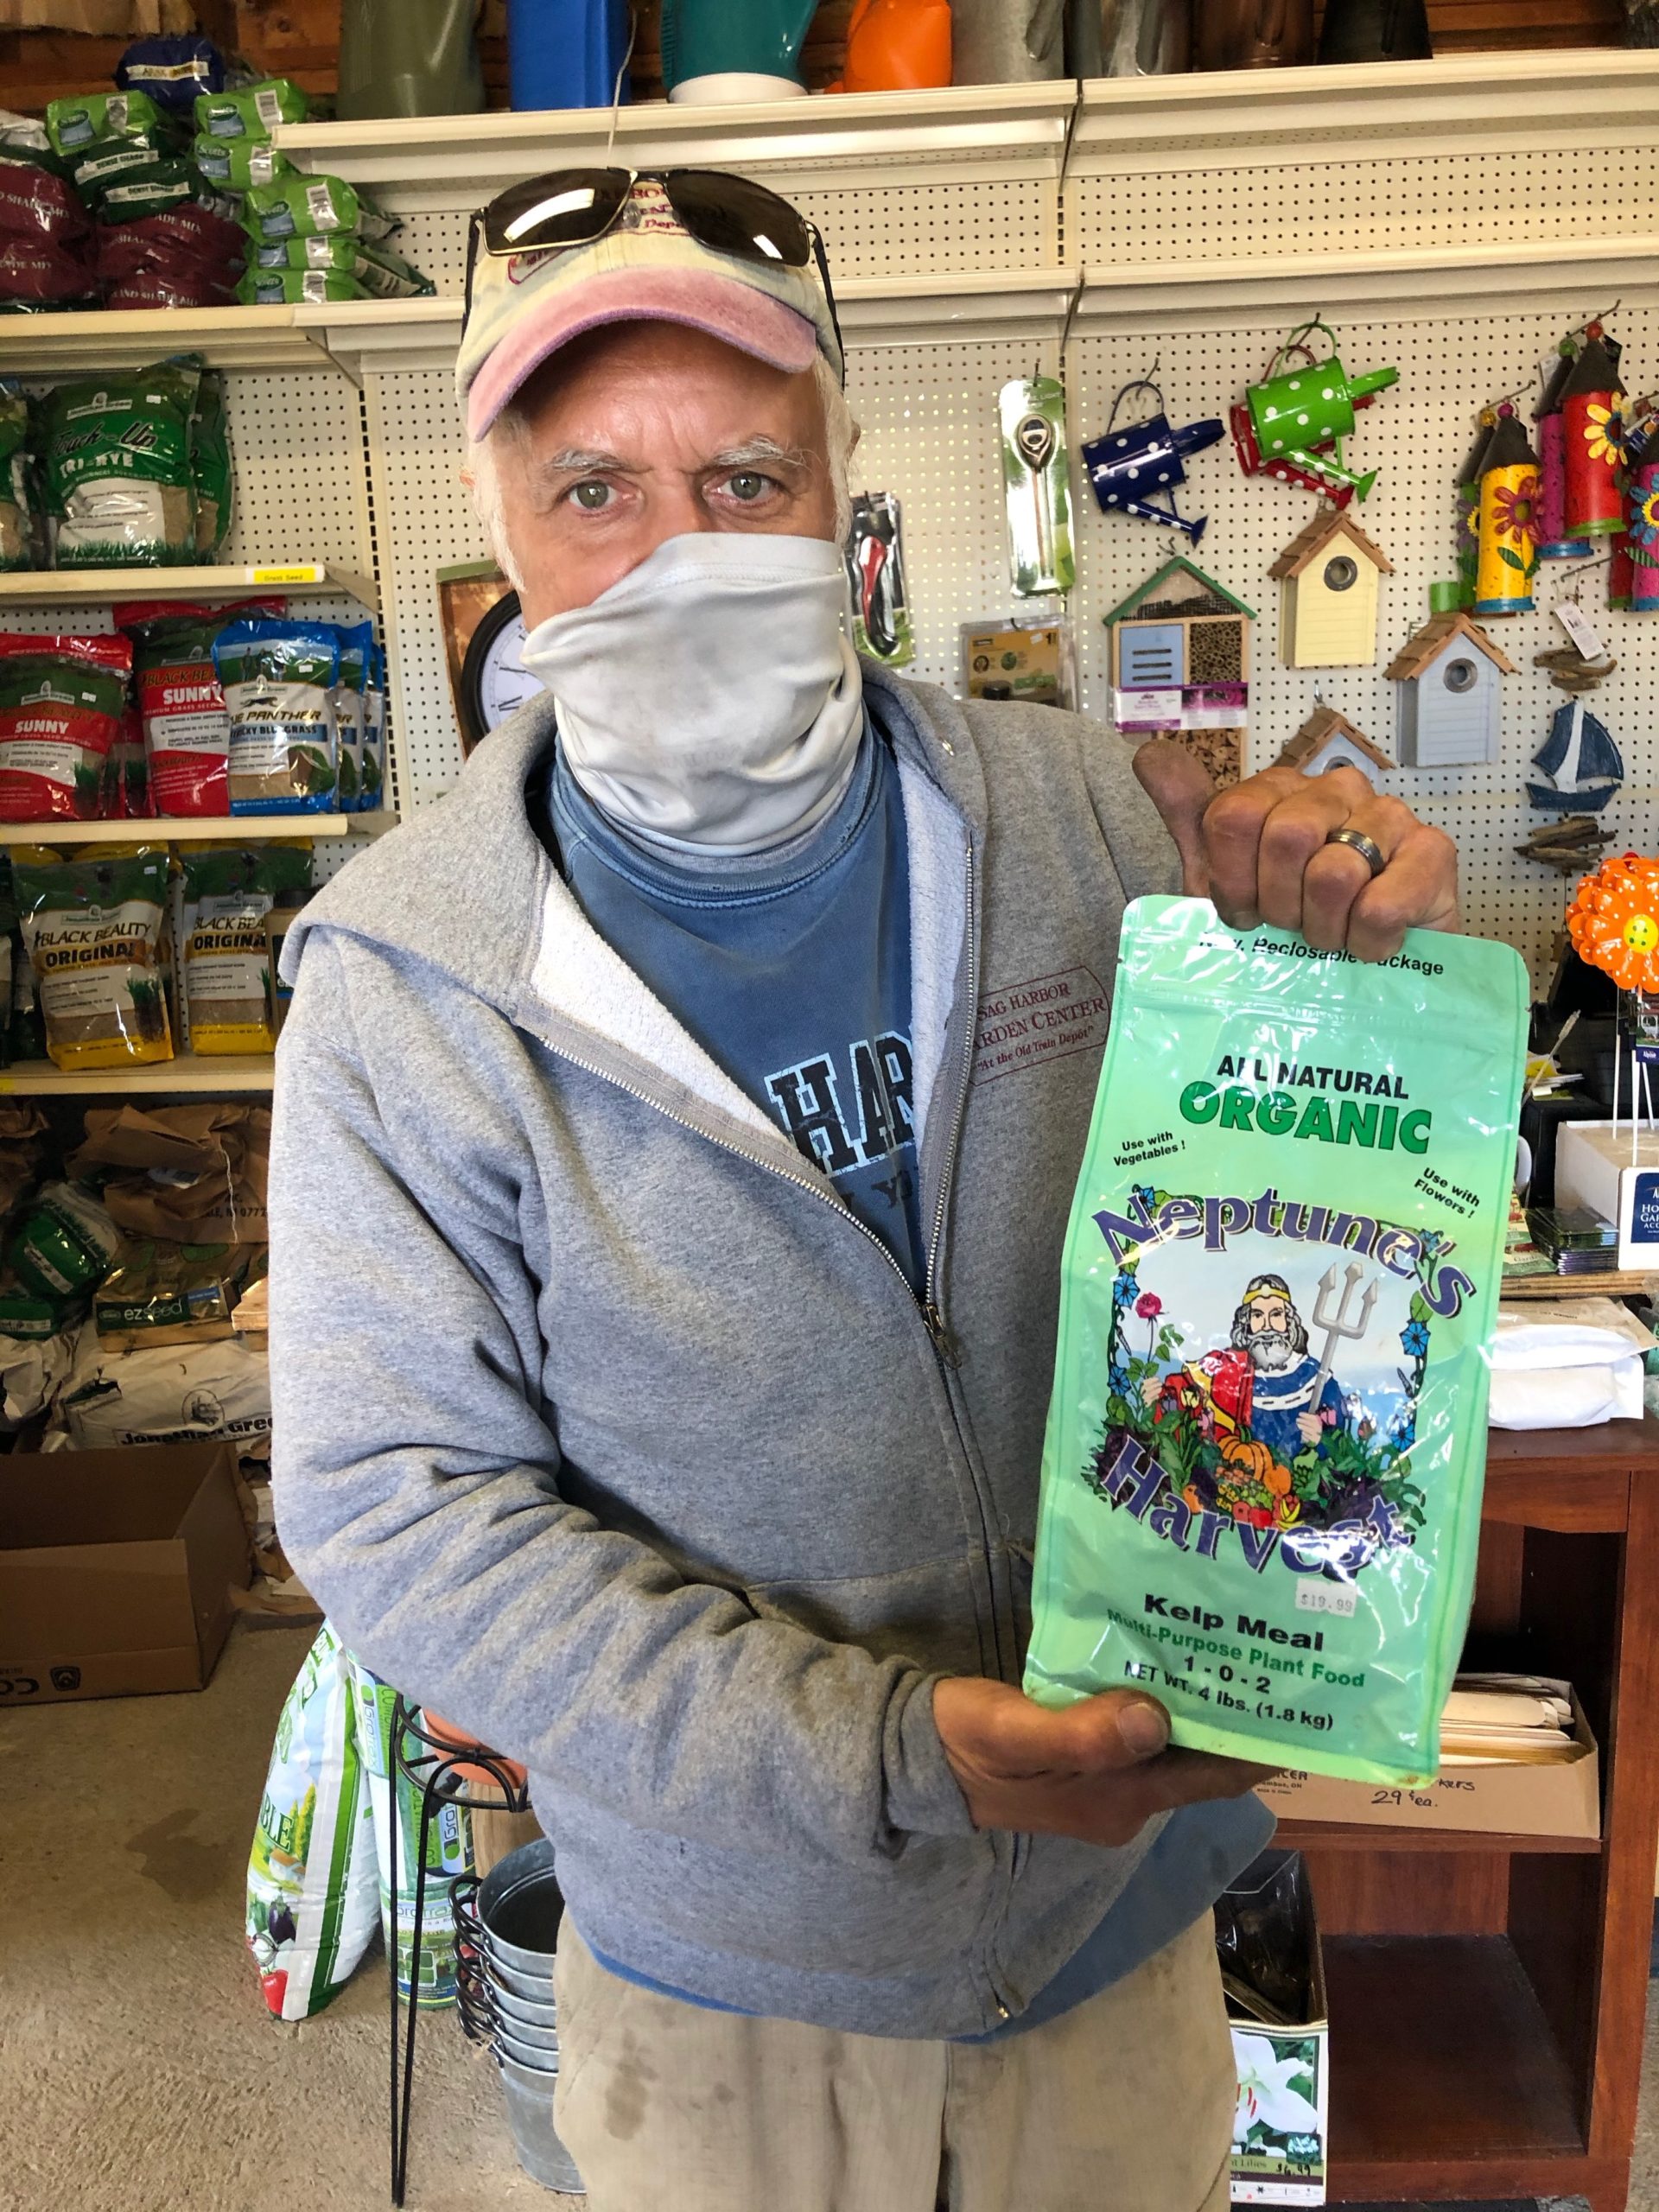 Even though Phil Bucking of Sag Harbor Garden Center sells potent kelp fertilizer, he points out that “kelp is easy to forage yourself because you don’t need that much and your garden doesn’t care what type you use.”